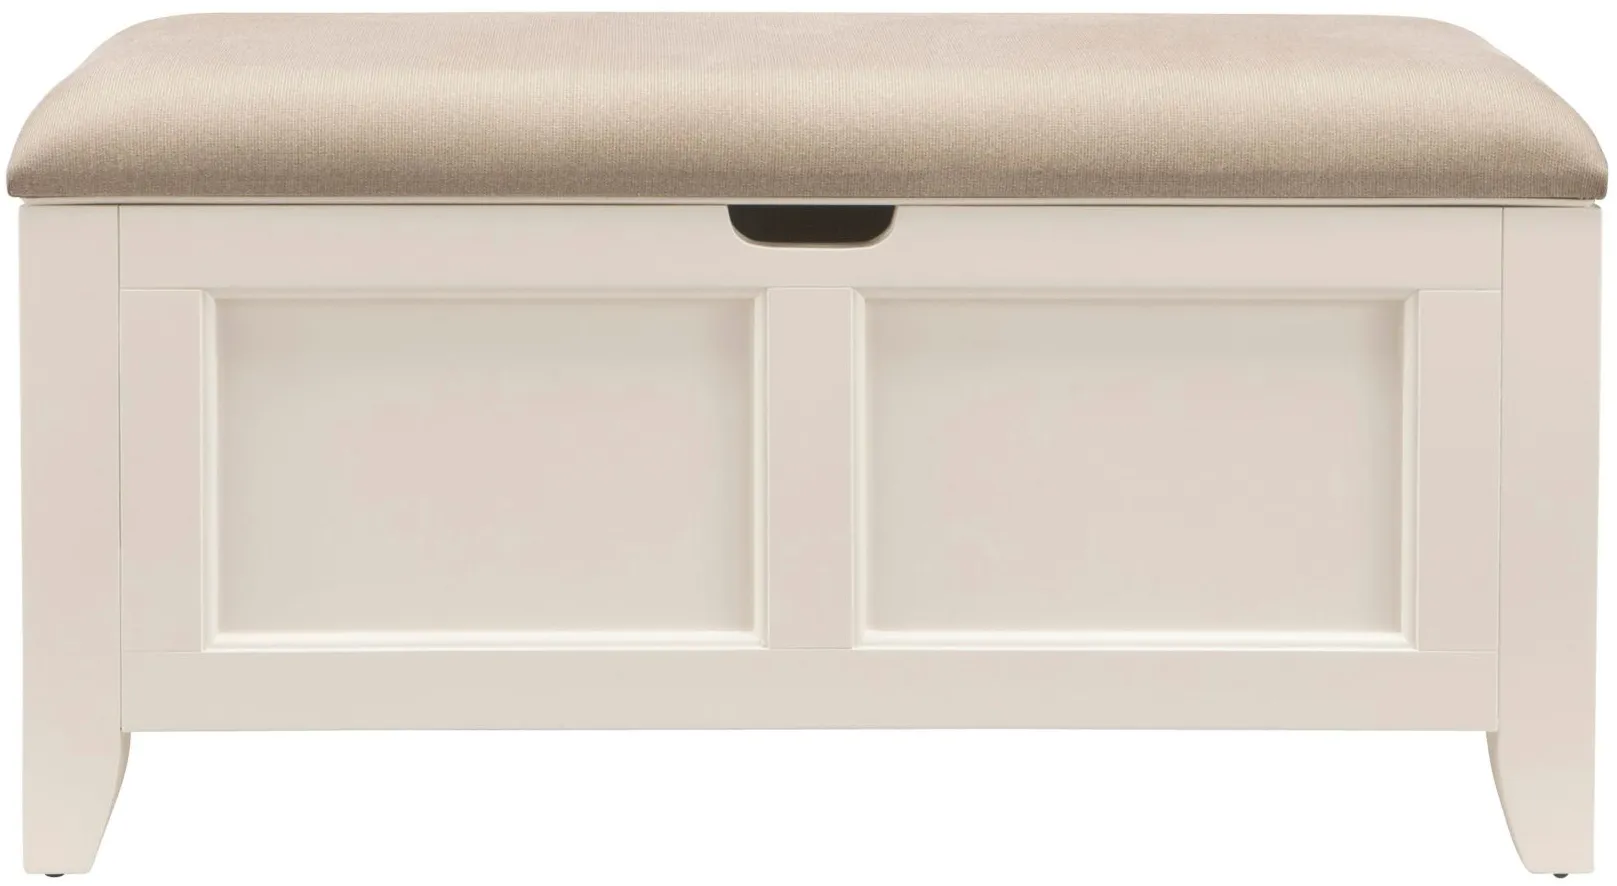 Kylie Youth Lift-Top Storage Bench in Cream by Bellanest